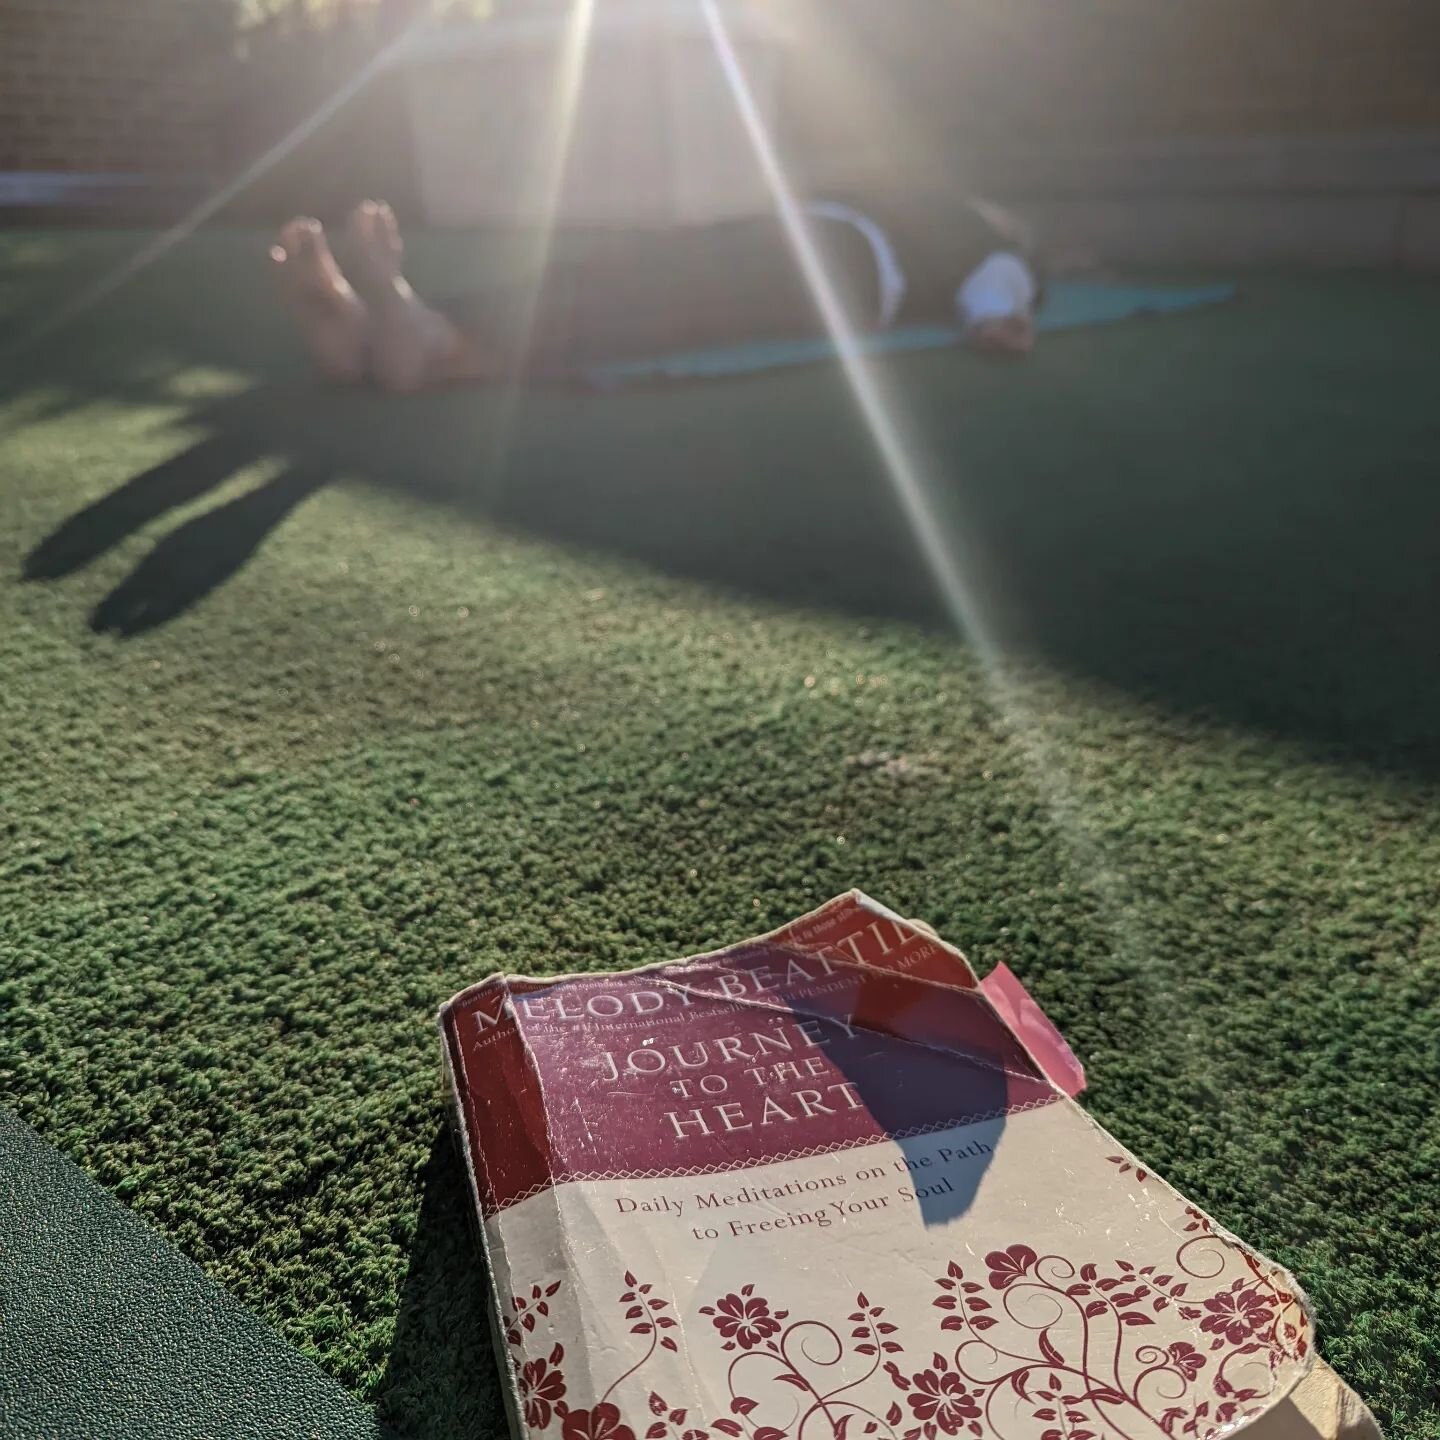 Find a moment to pause - An opportunity to rest, refresh, and recharge your mind, body, and spirit

Here's an opportunity (or two) ⤵️

🌊SUP Yoga Balance &amp; Bowls 
with @rutabagajuicery 
Saturday 9/17 -11:00AM 

🍷Yoga &amp; Wine at Cascia Vineyar